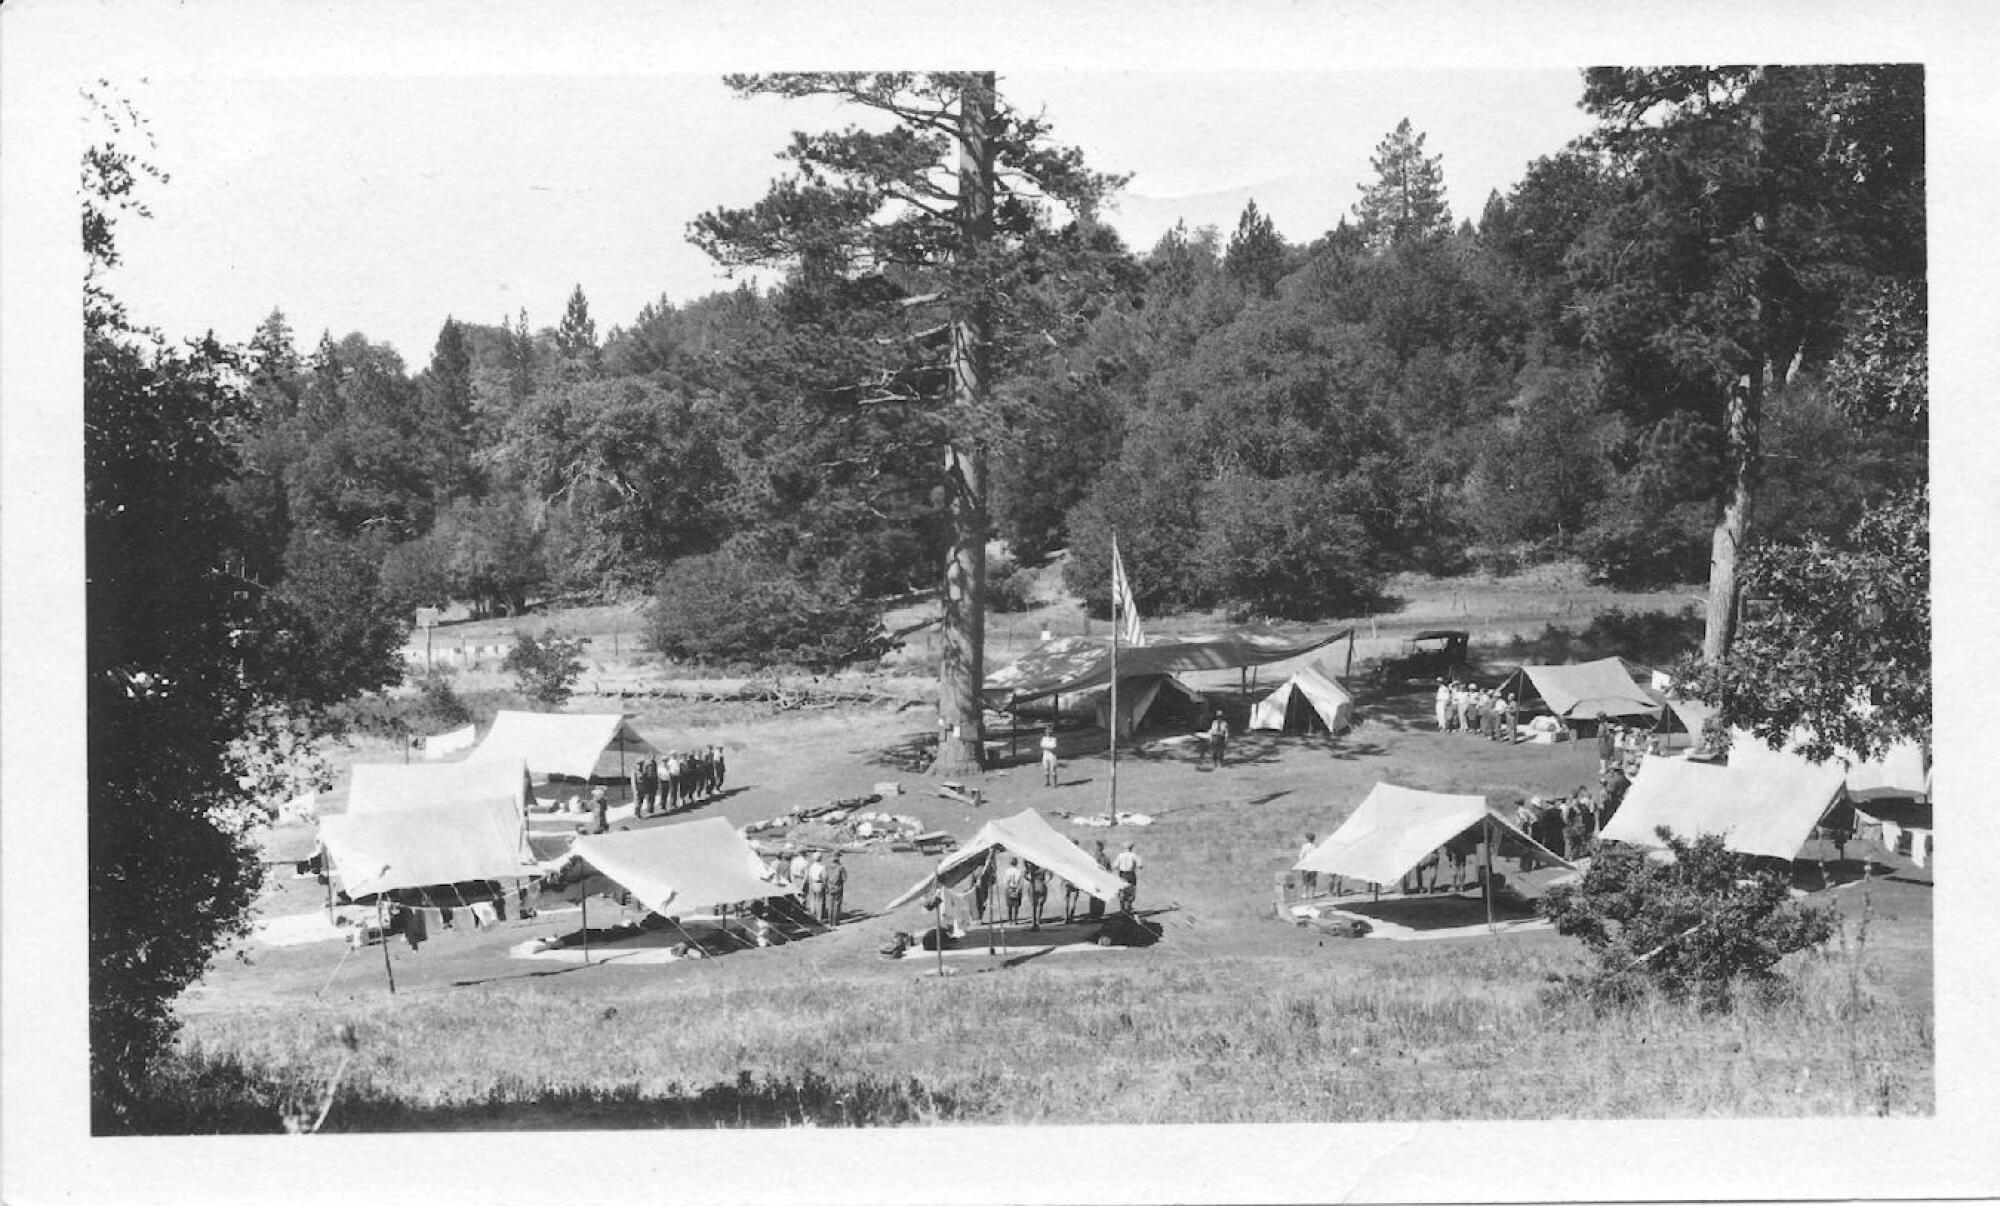 In its early years, Camp Marston offered only tent camping.